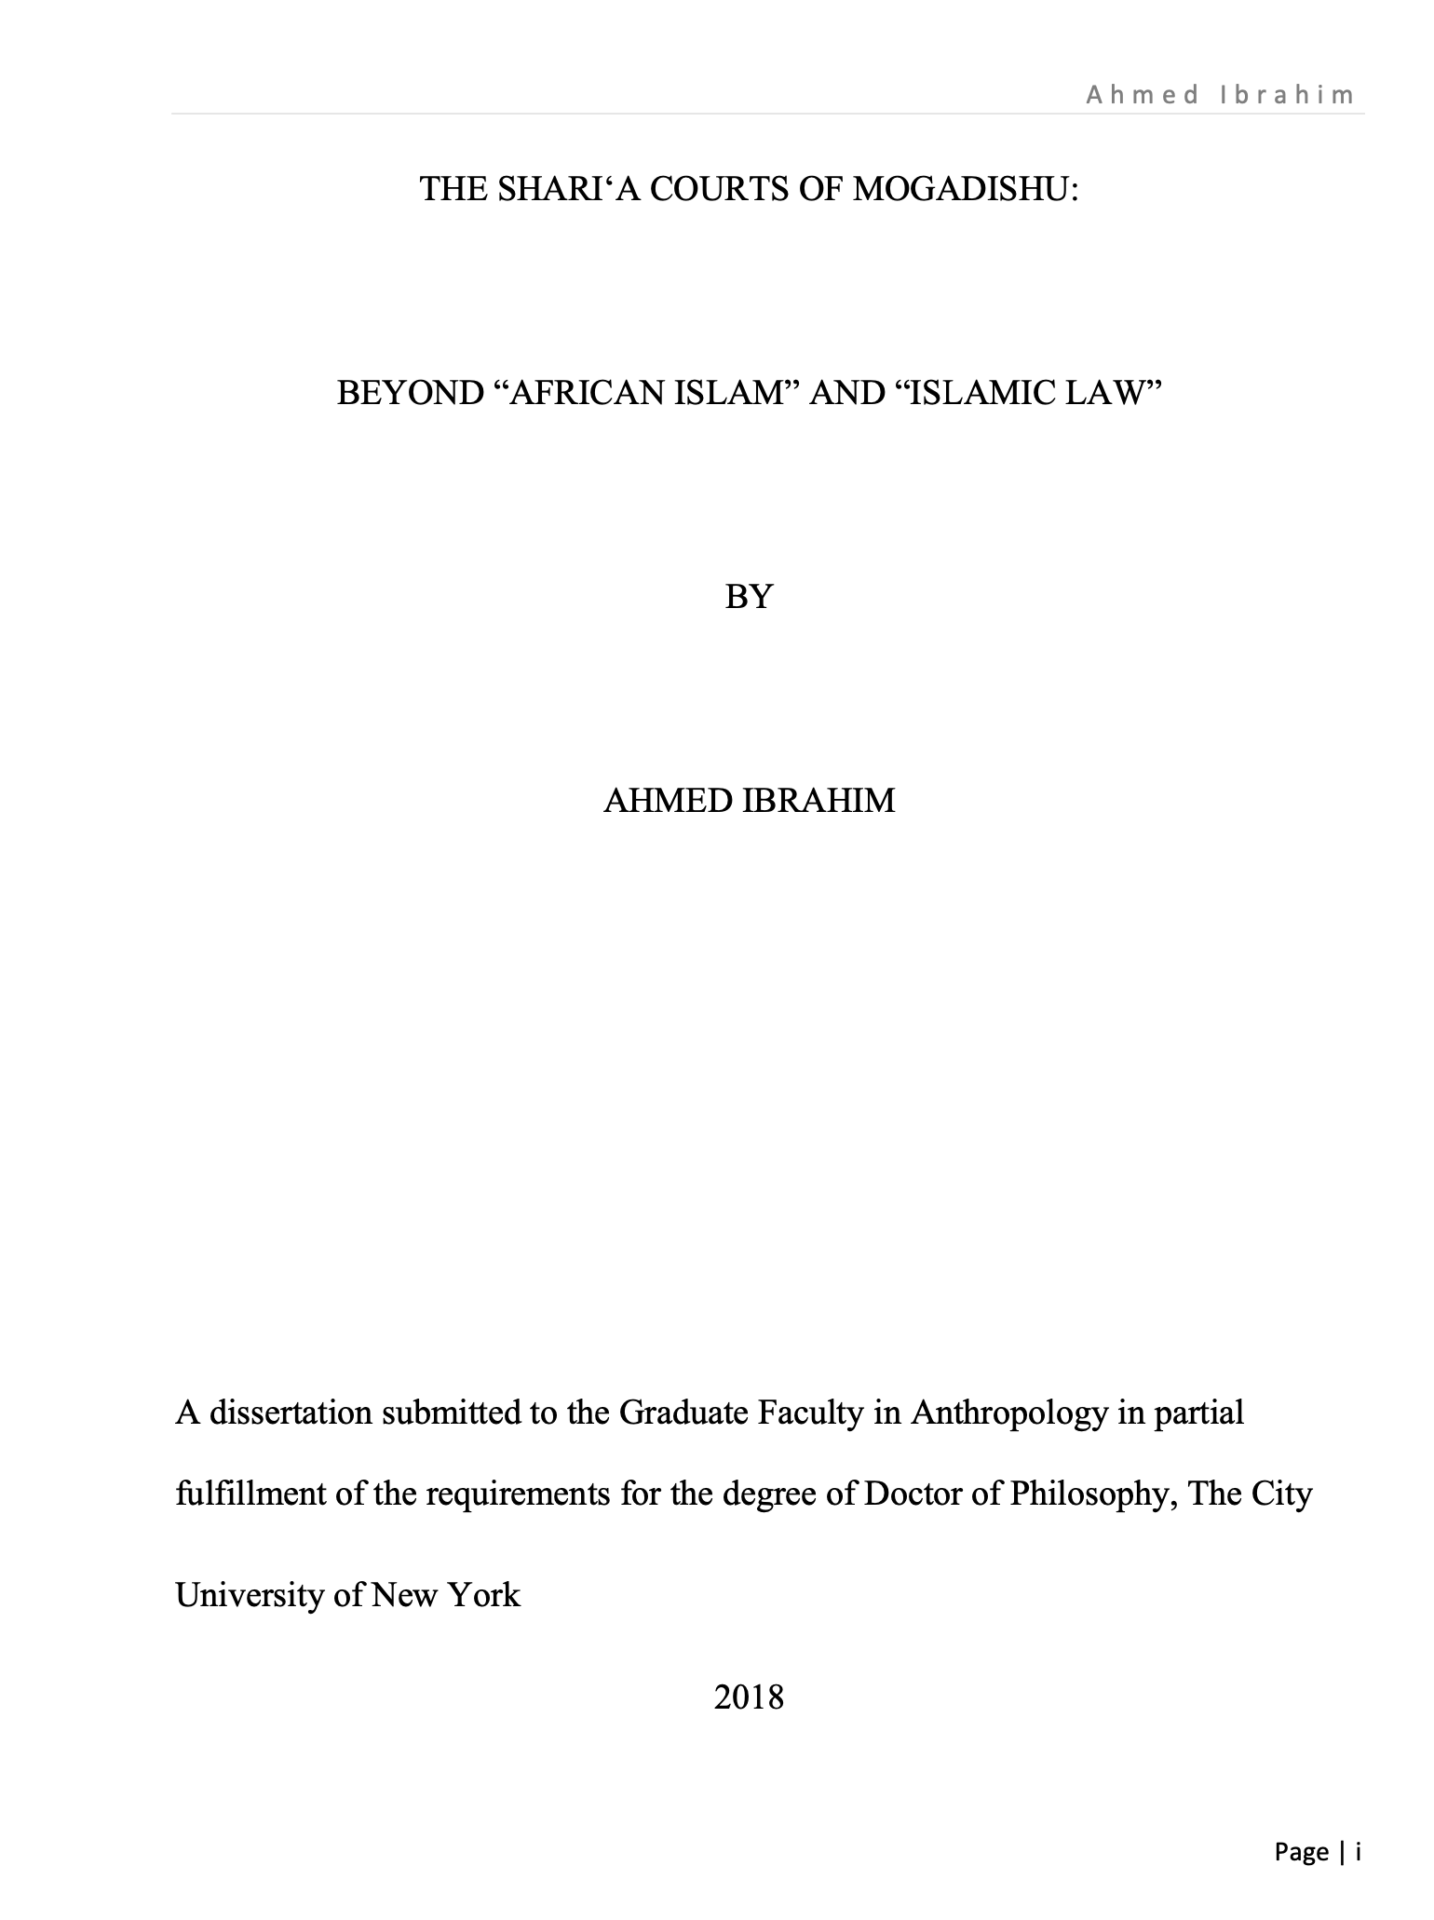 The Shari'a Courts of Mogadishu: Beyond "African Islam" and "Islamic Law"